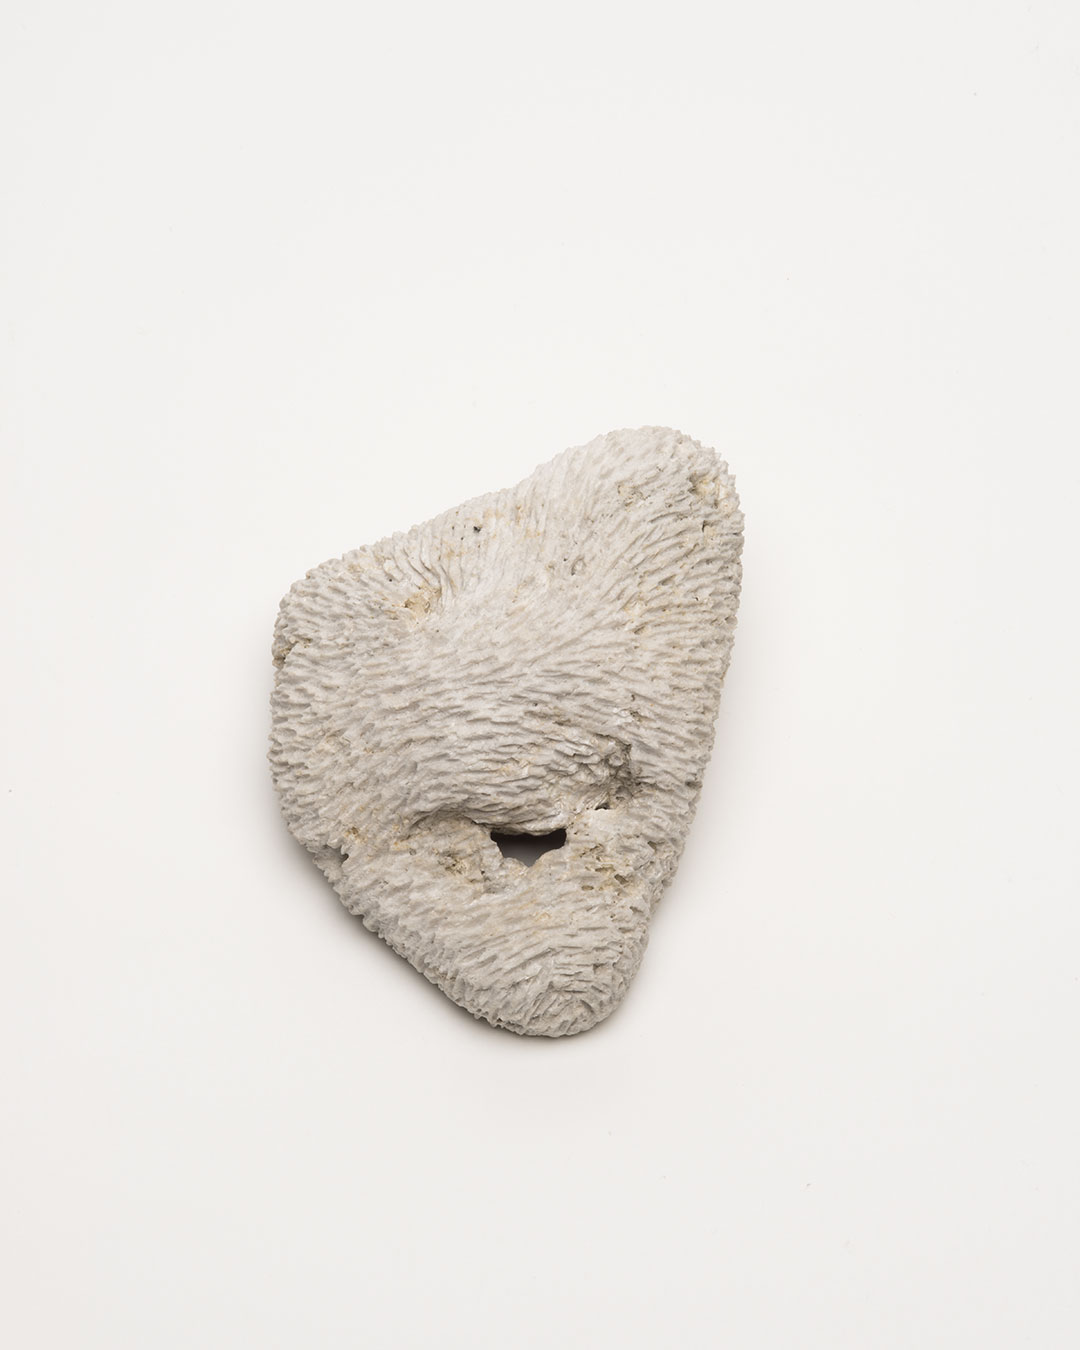 Vivi Touloumidi, What Will the Cosmos Say? 2013, brooch; pumice stone, steel, 110 x 80 x 70 mm, €280 (Image: front)